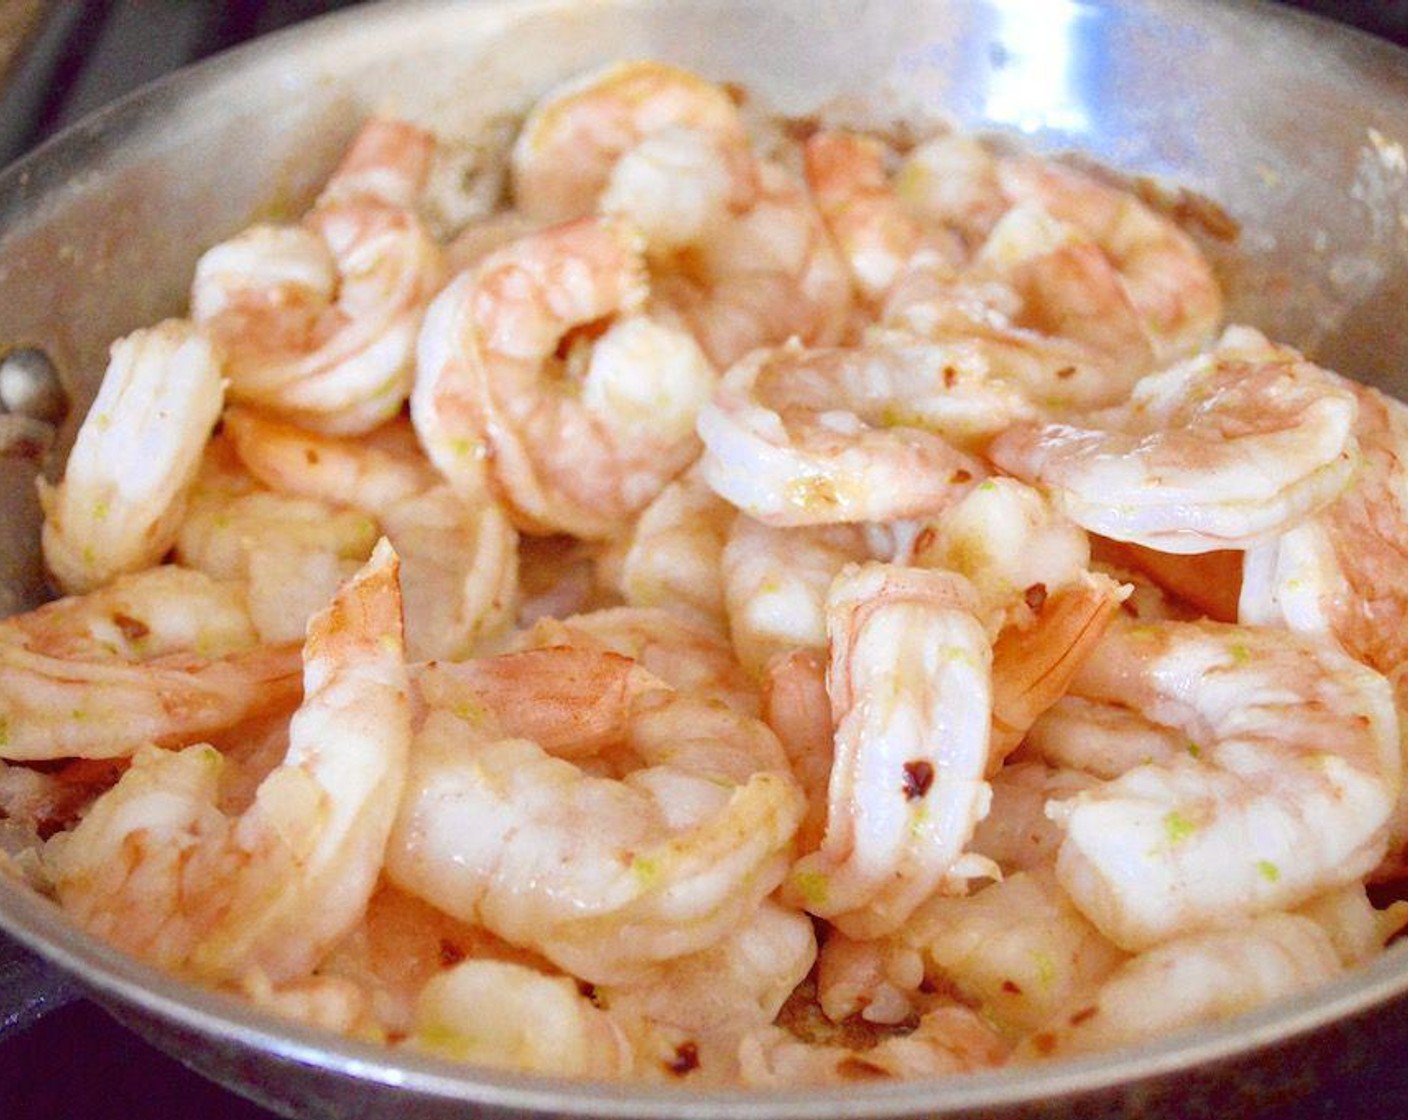 step 3 Get out a large skillet and heat the Coconut Oil (1 tsp) in it over medium high heat. Add the Shallot (1) and let them get soft for 30 seconds. Then add the Shrimp (1.5 lb) and Lime (1) and let the shrimp cook until opaque and pink for about 4-5 minutes.